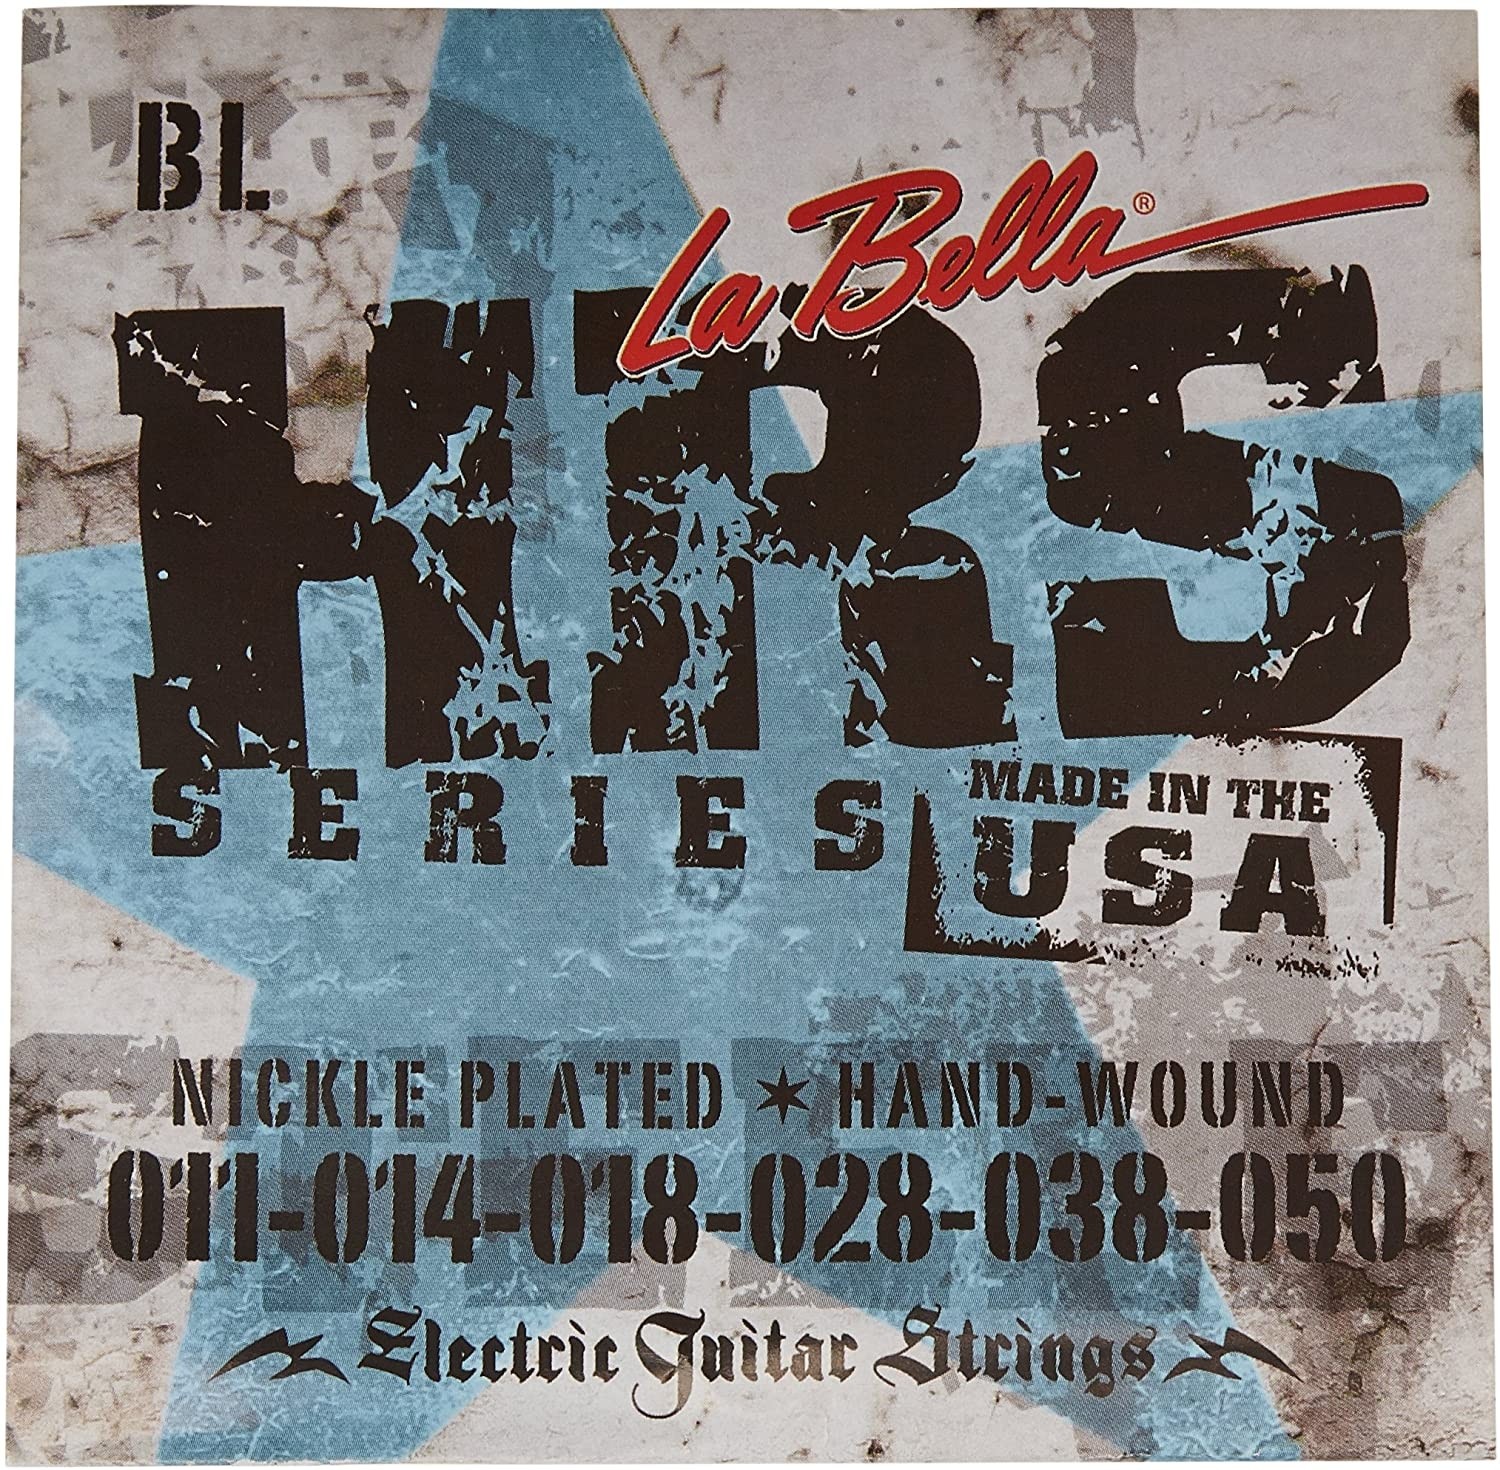 LaBella HRS-BL Nickel Blues Light Electric Guitar Strings .011-.050